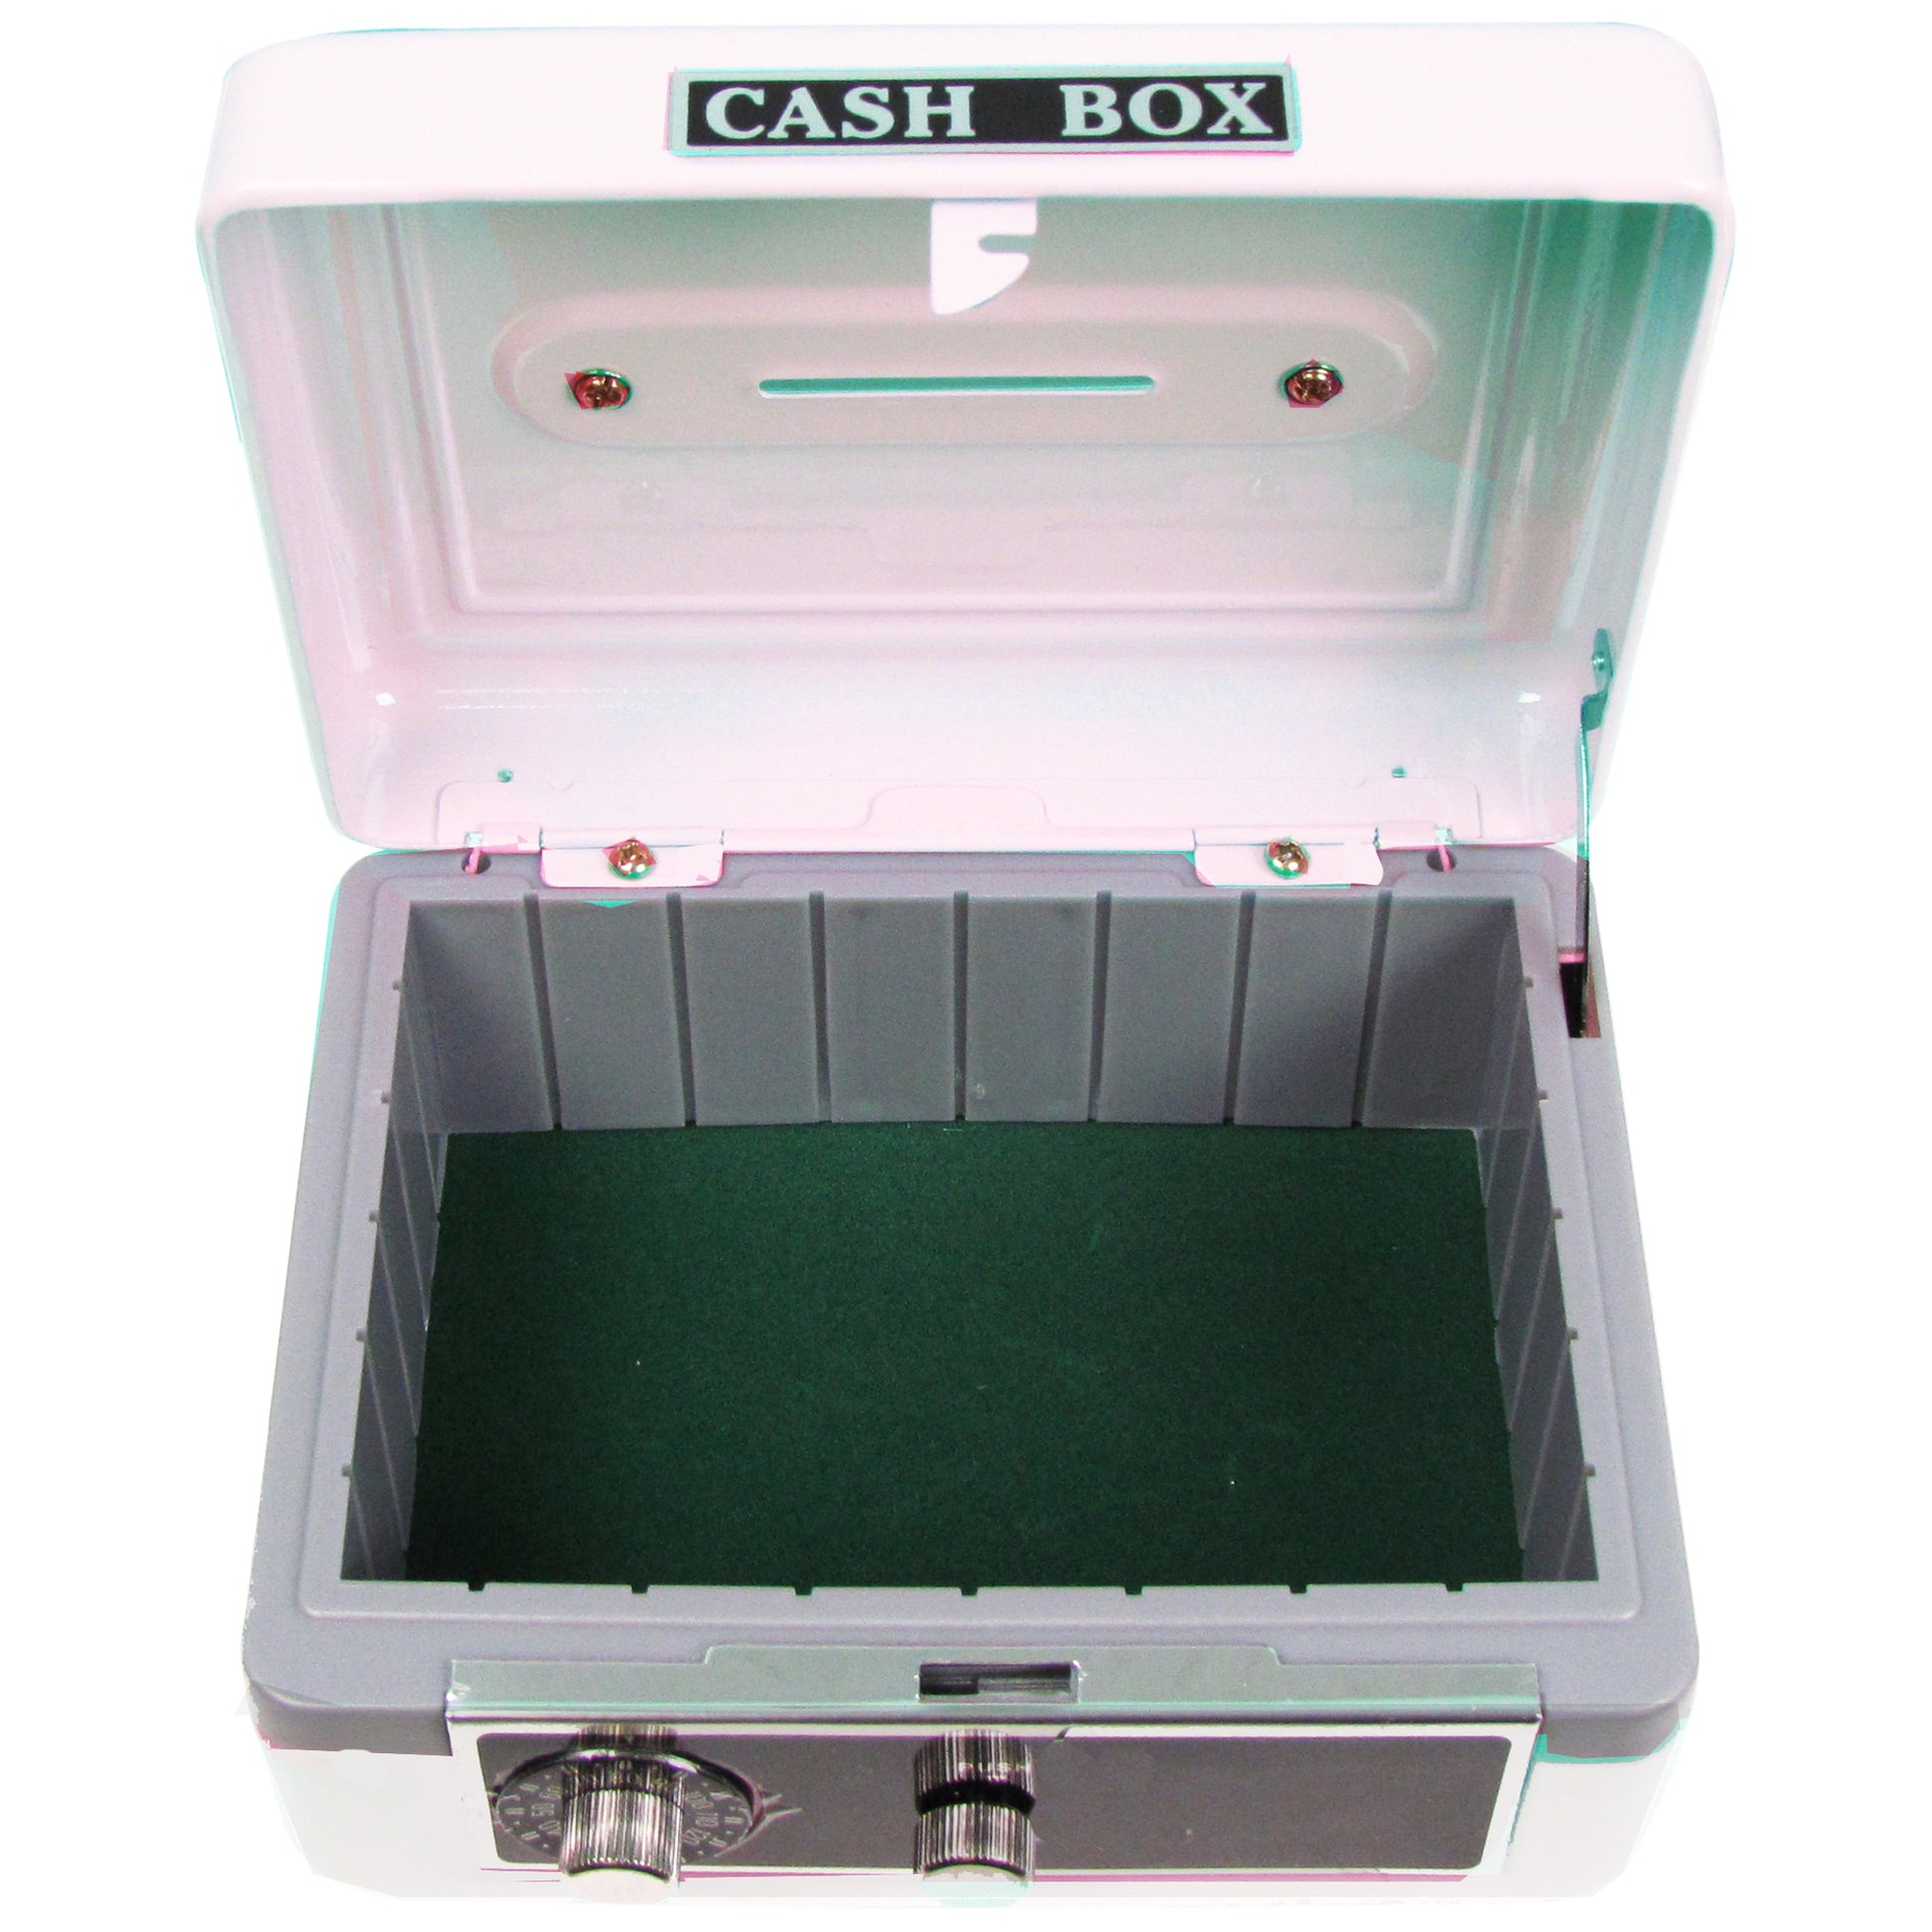 Personalized White Cash Box with Tribal Arrows Boy design